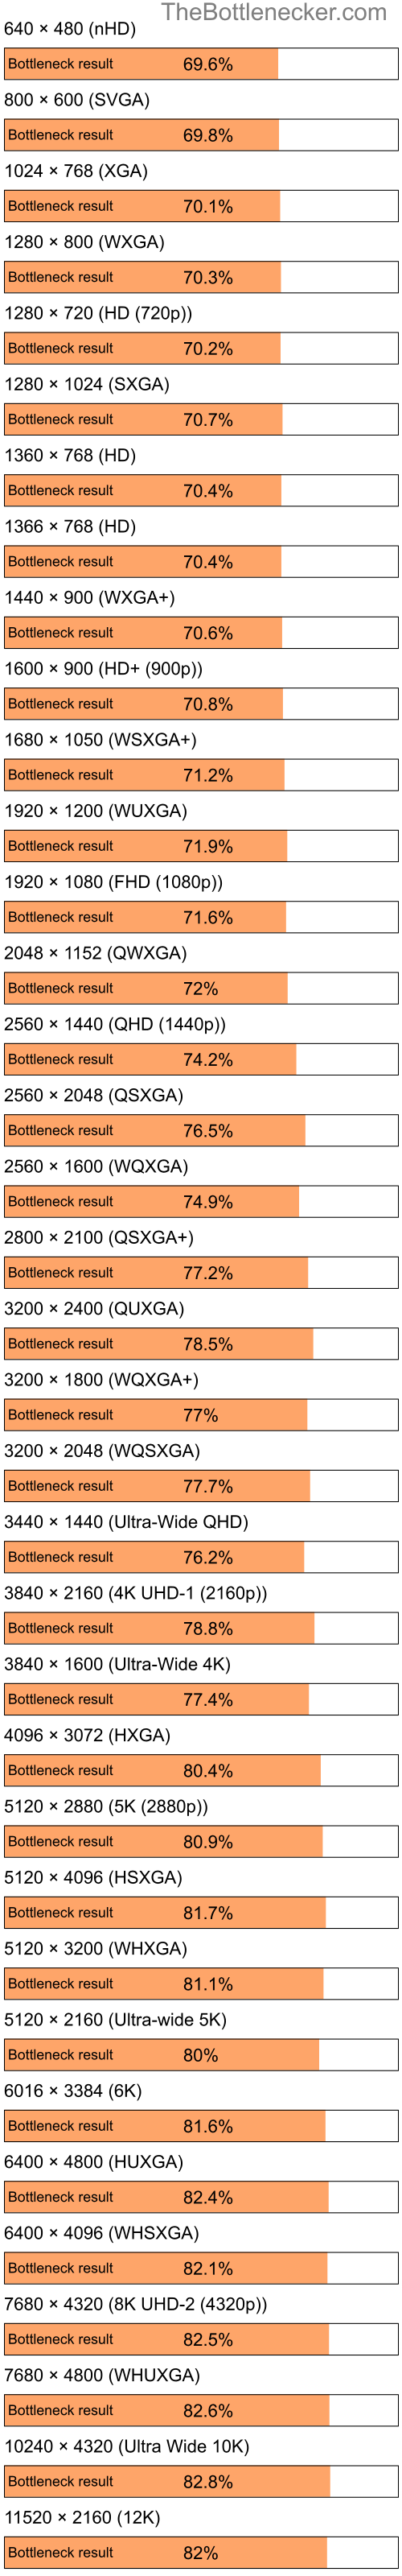 Bottleneck results by resolution for Intel Pentium 4 and NVIDIA GeForce 6600 LE in General Tasks